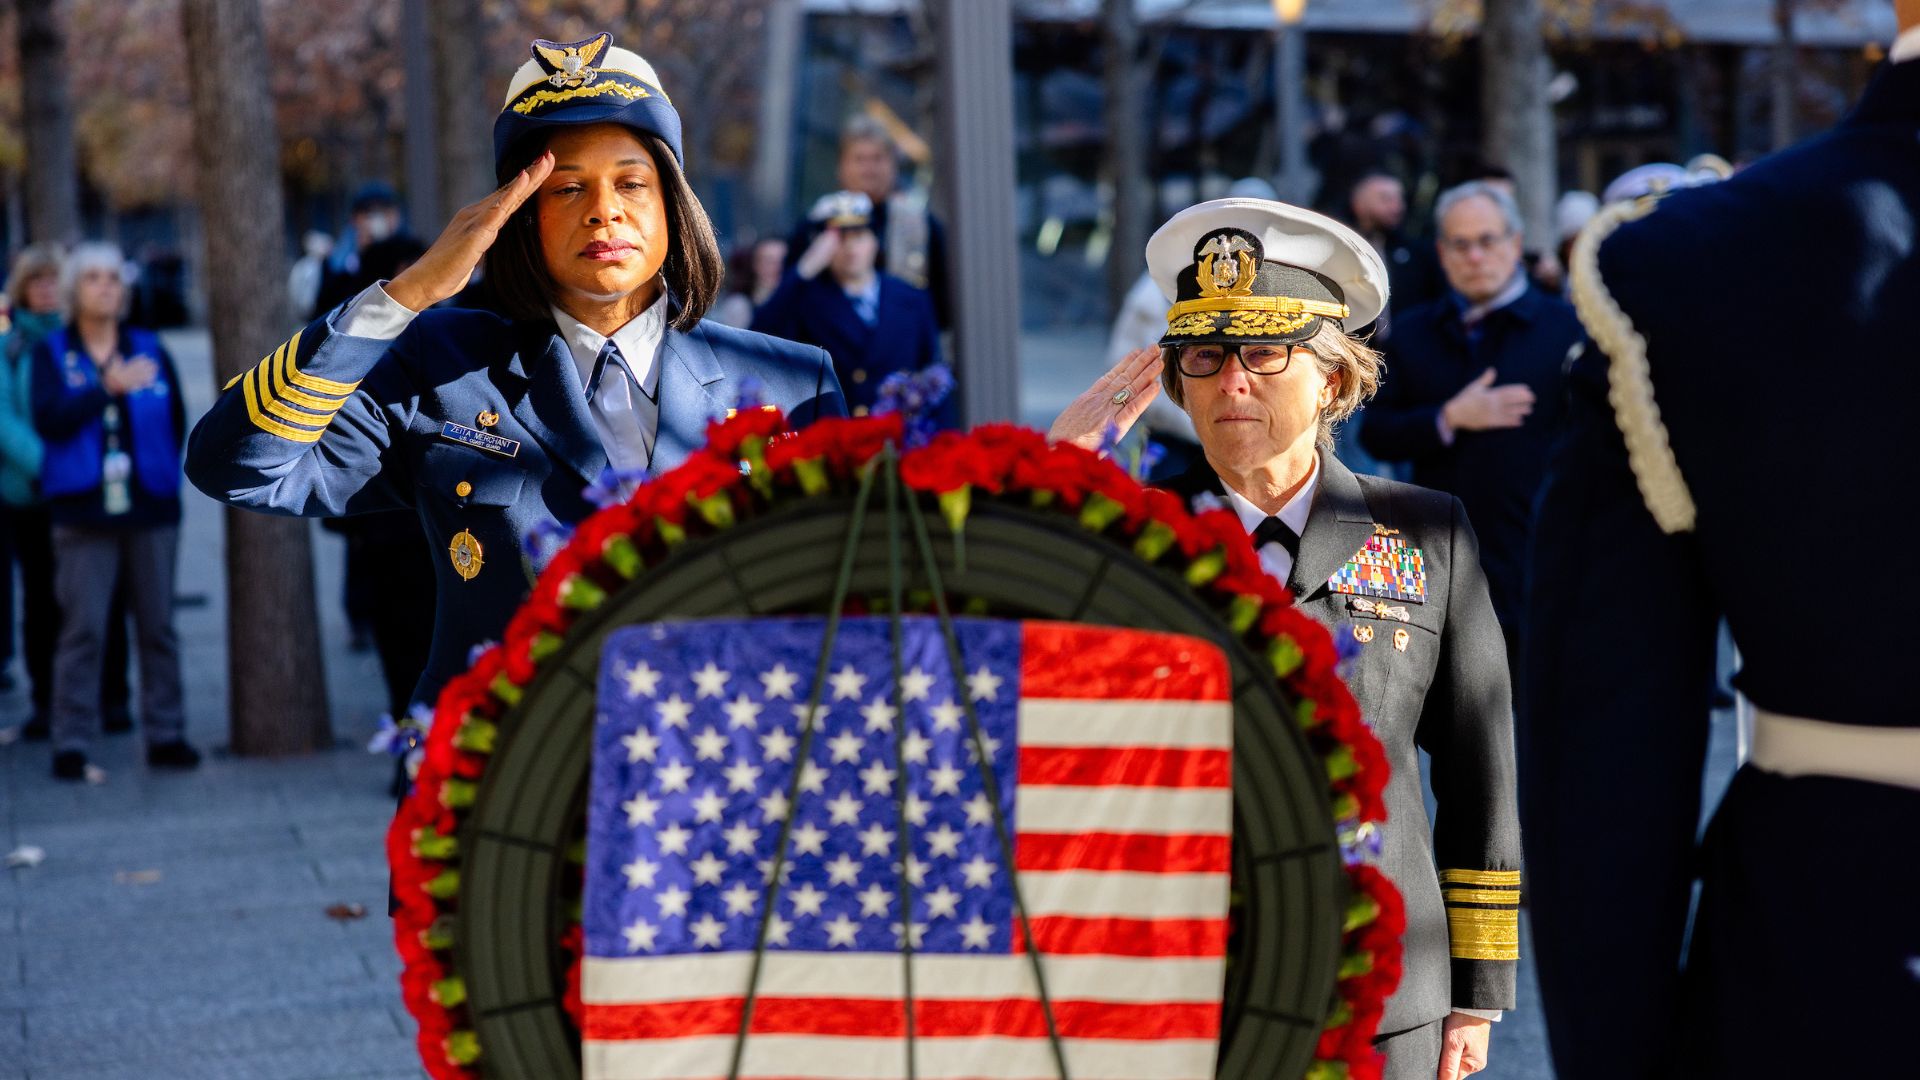 Two women in military uniforms salute a tribute wreath with an American flag at center